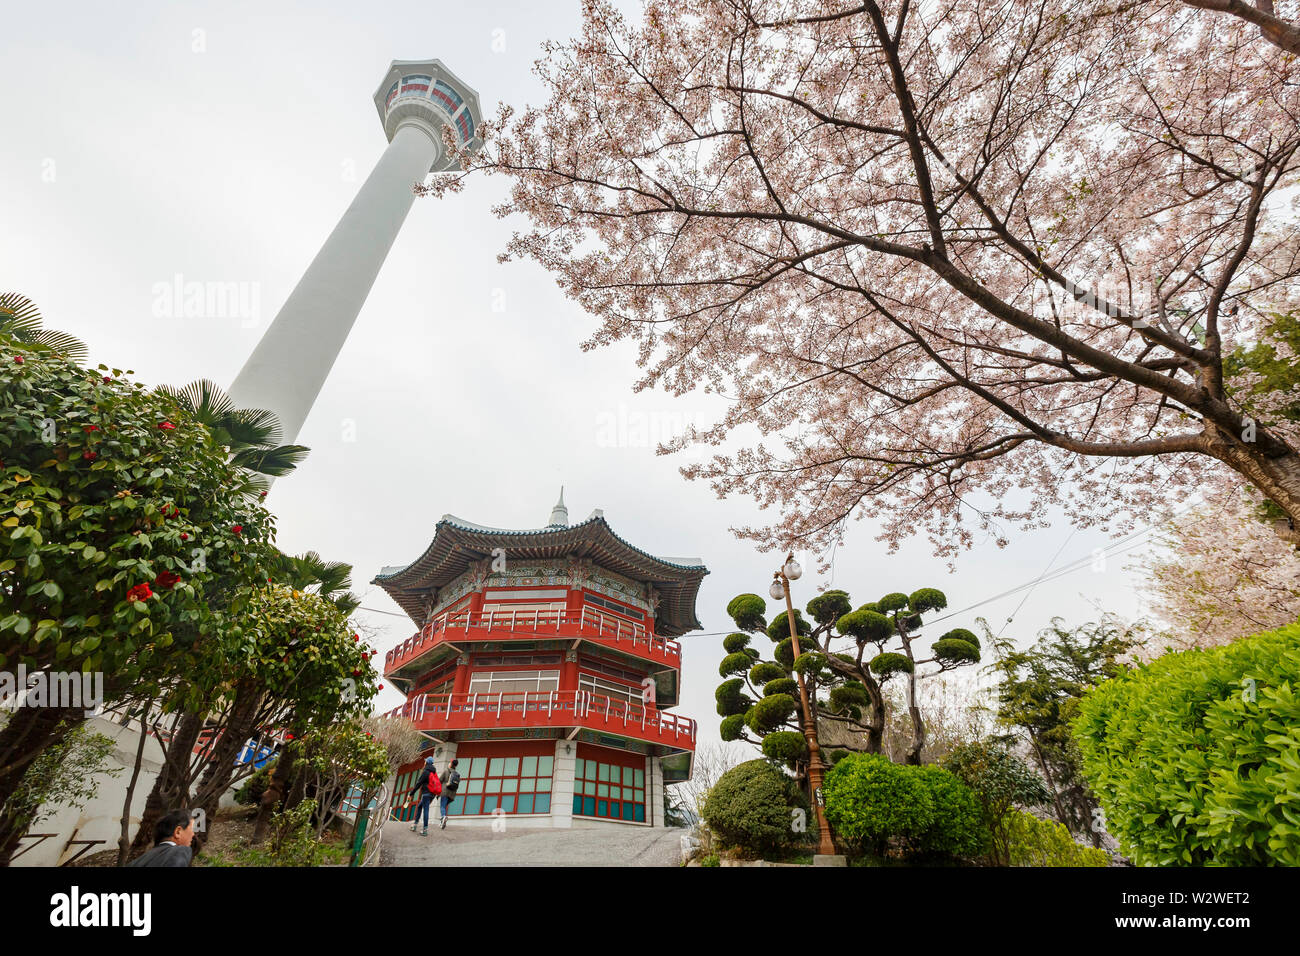 Busan, APR 2: Beautiful cherry tree blossom in Geumgang Park on APR 2, 2014 at Busan, South Korea Stock Photo